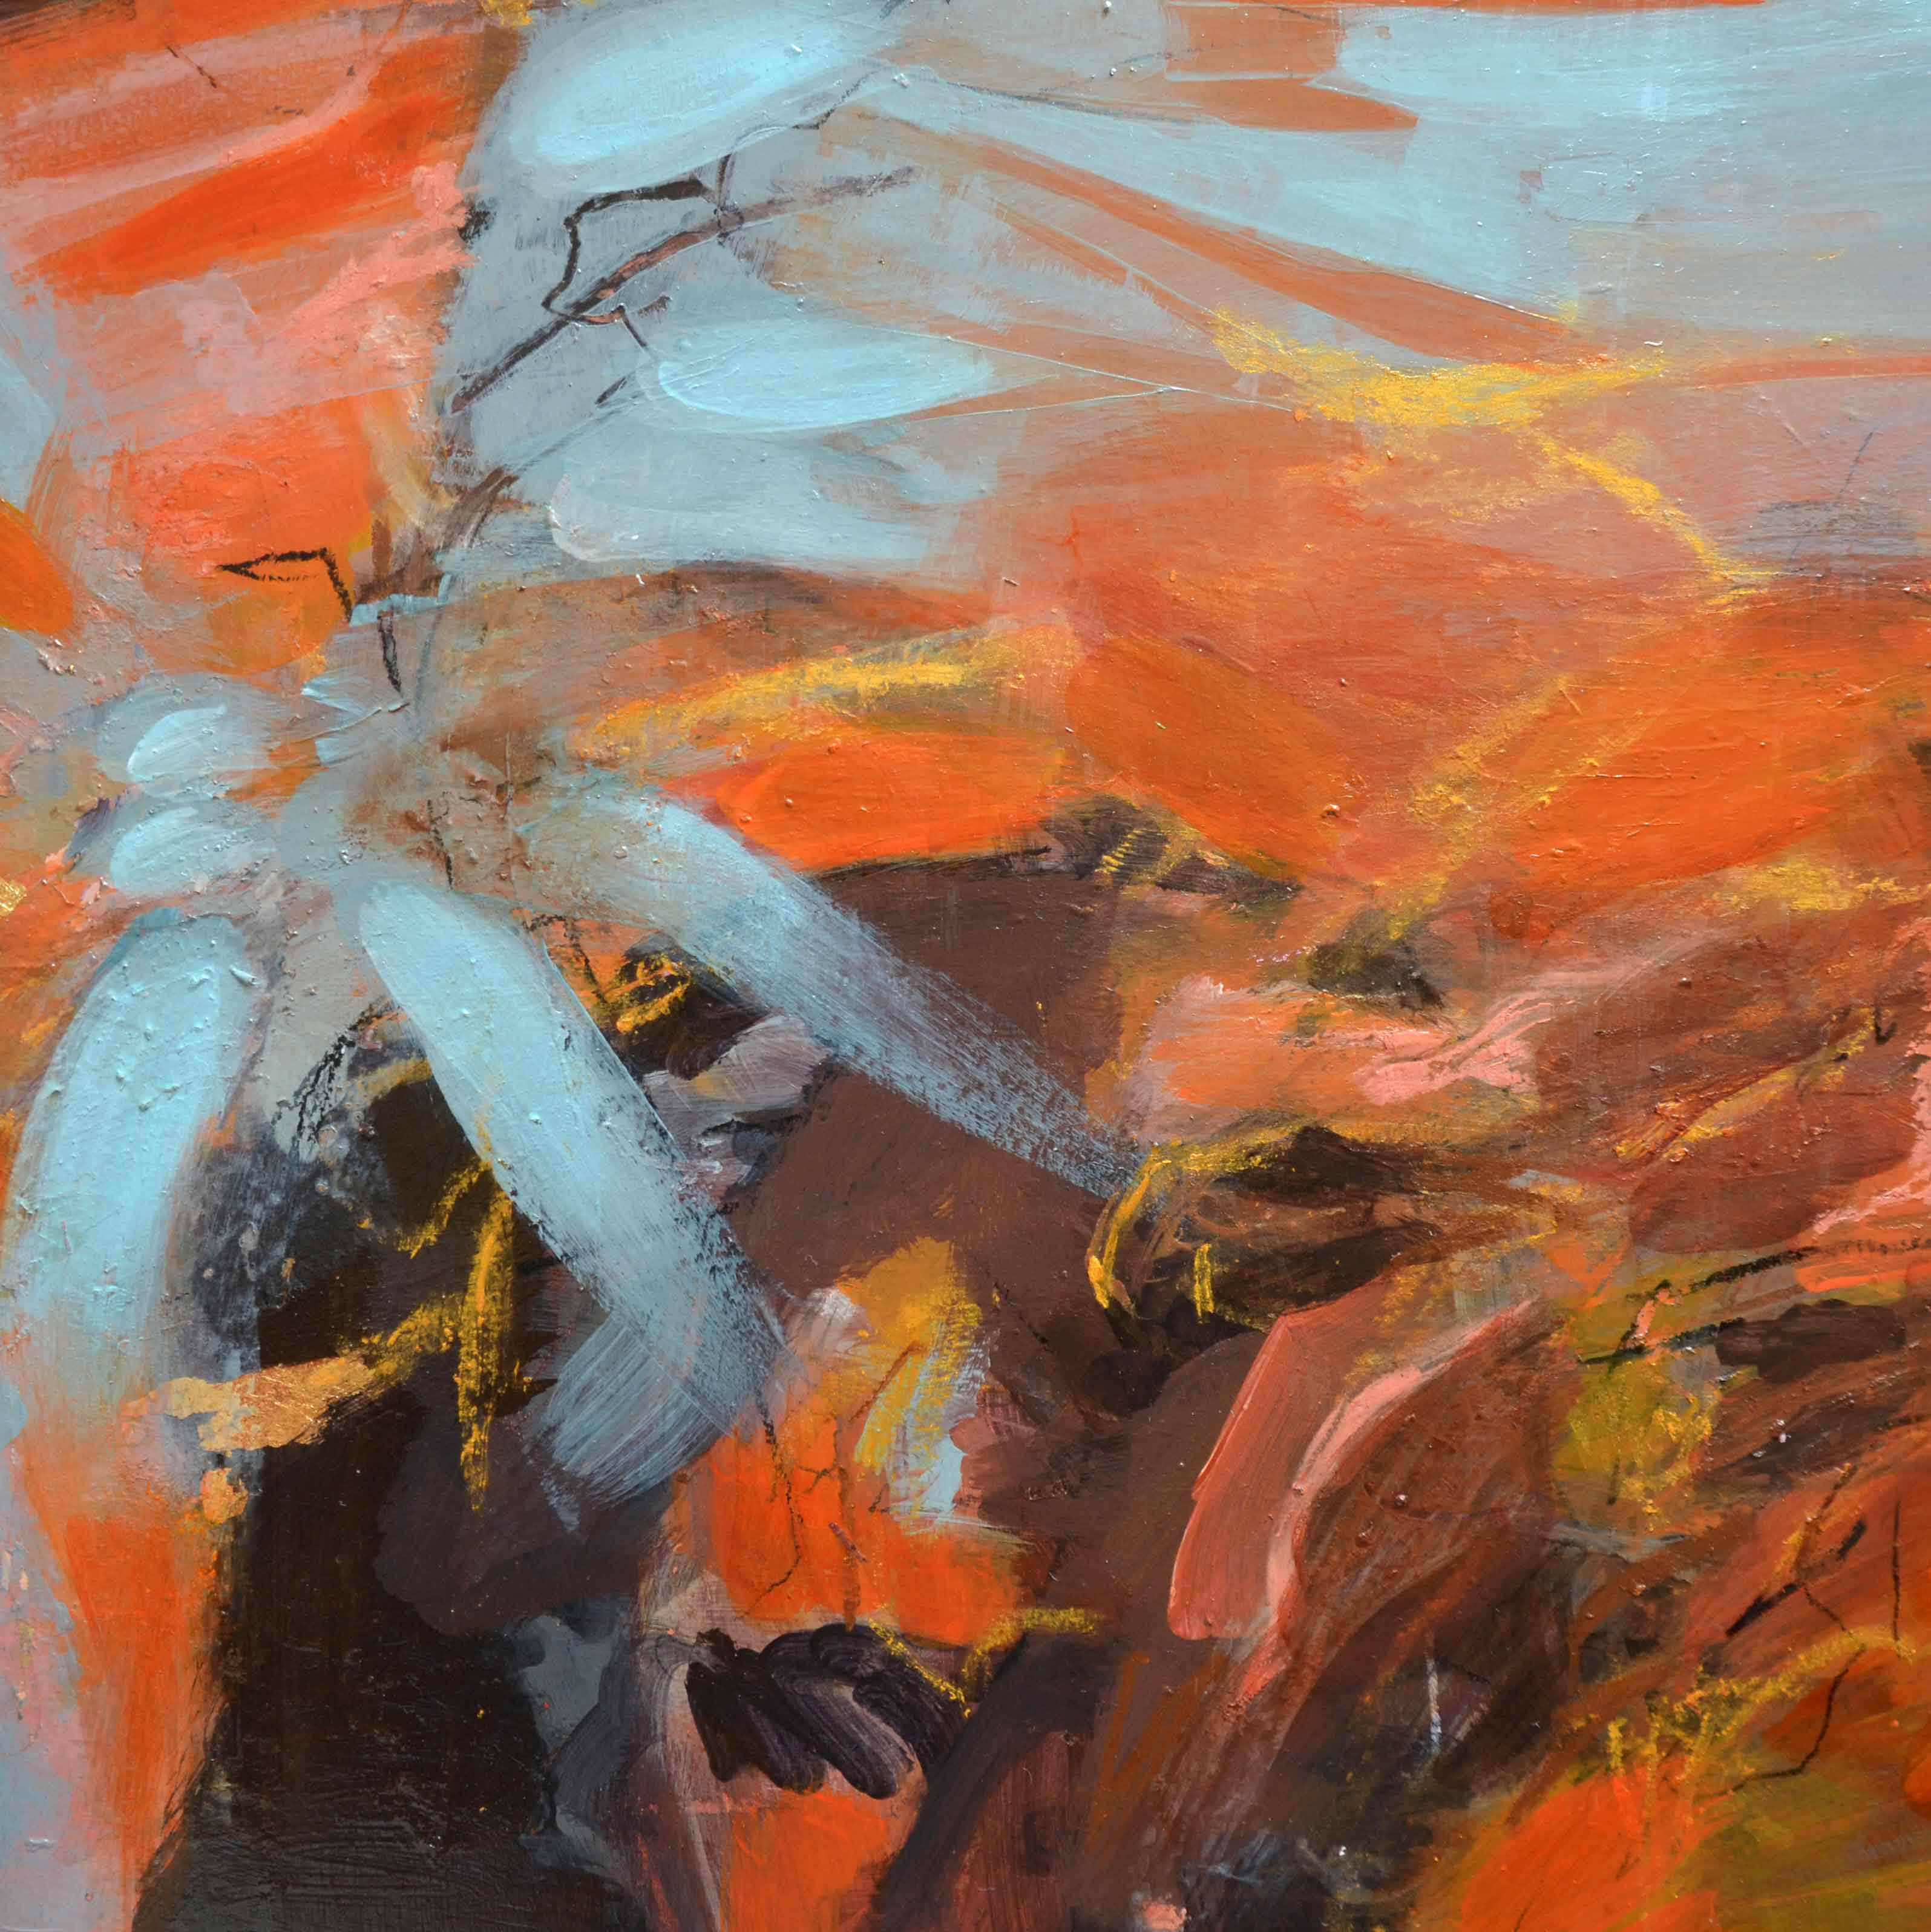 Detail of abstract painting by Jeanne-Marie Persaud